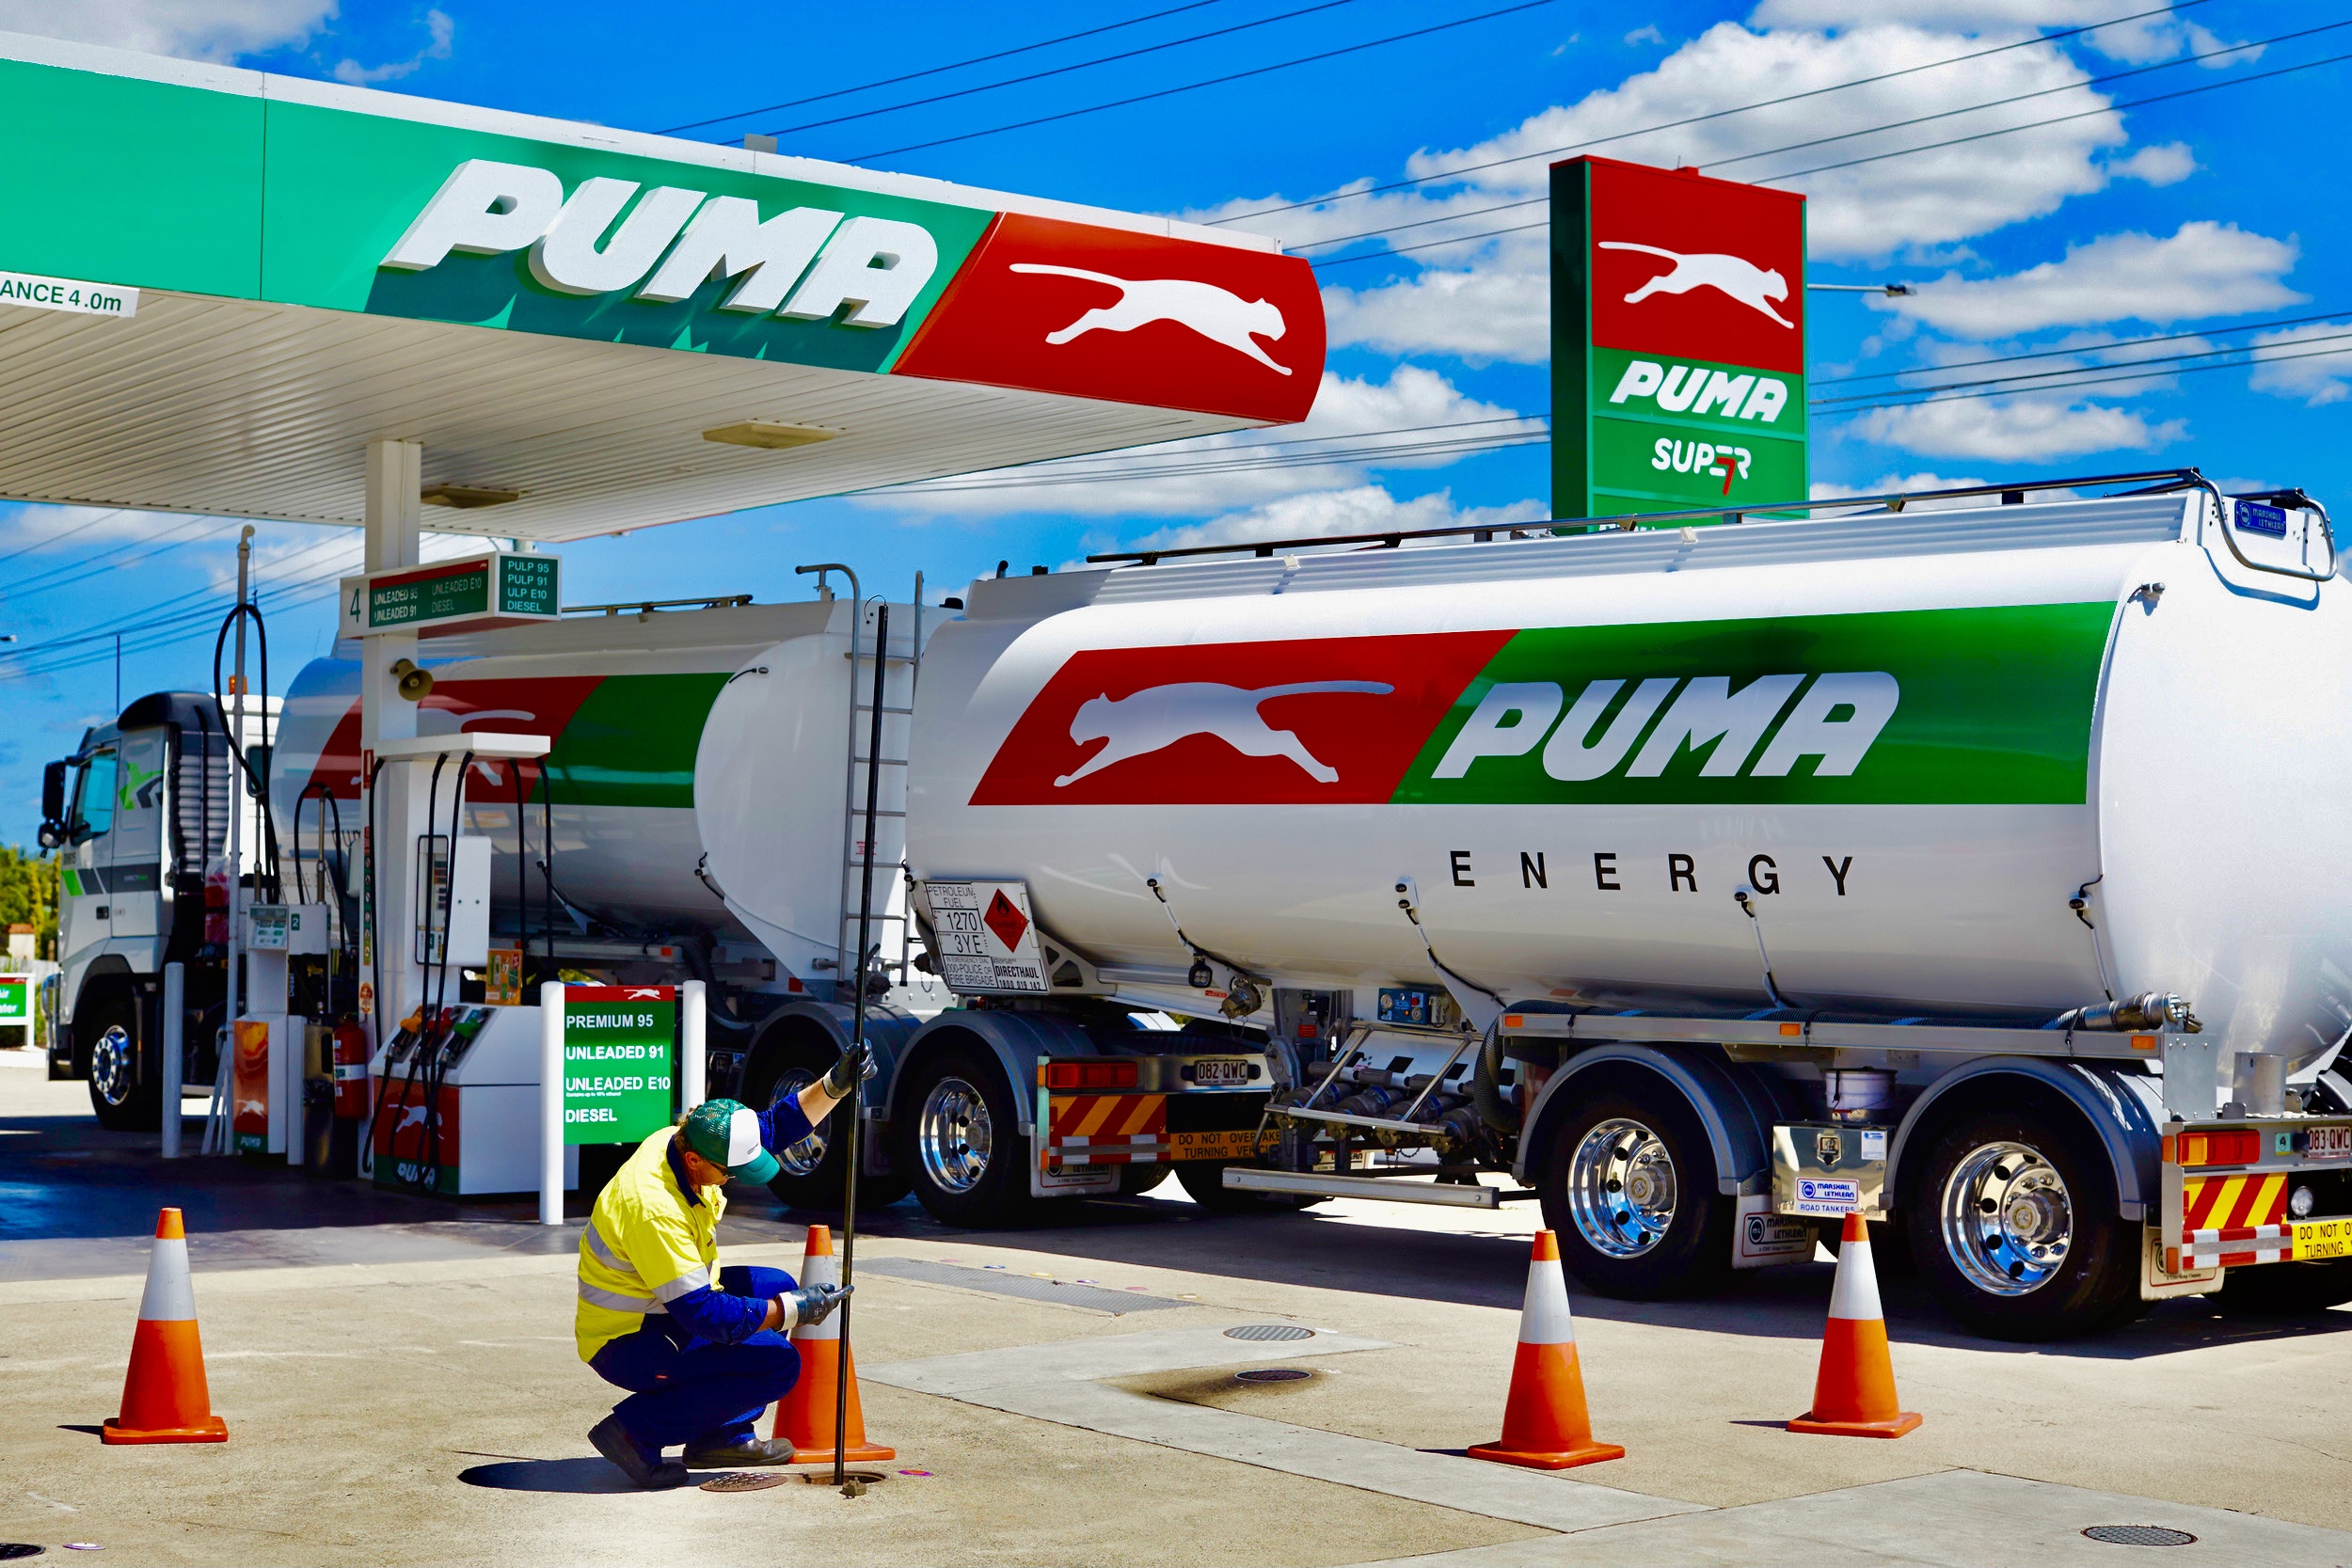 liquidity and 'fuel subsidies' dent PUMA in pandemic year The Business Telegraph